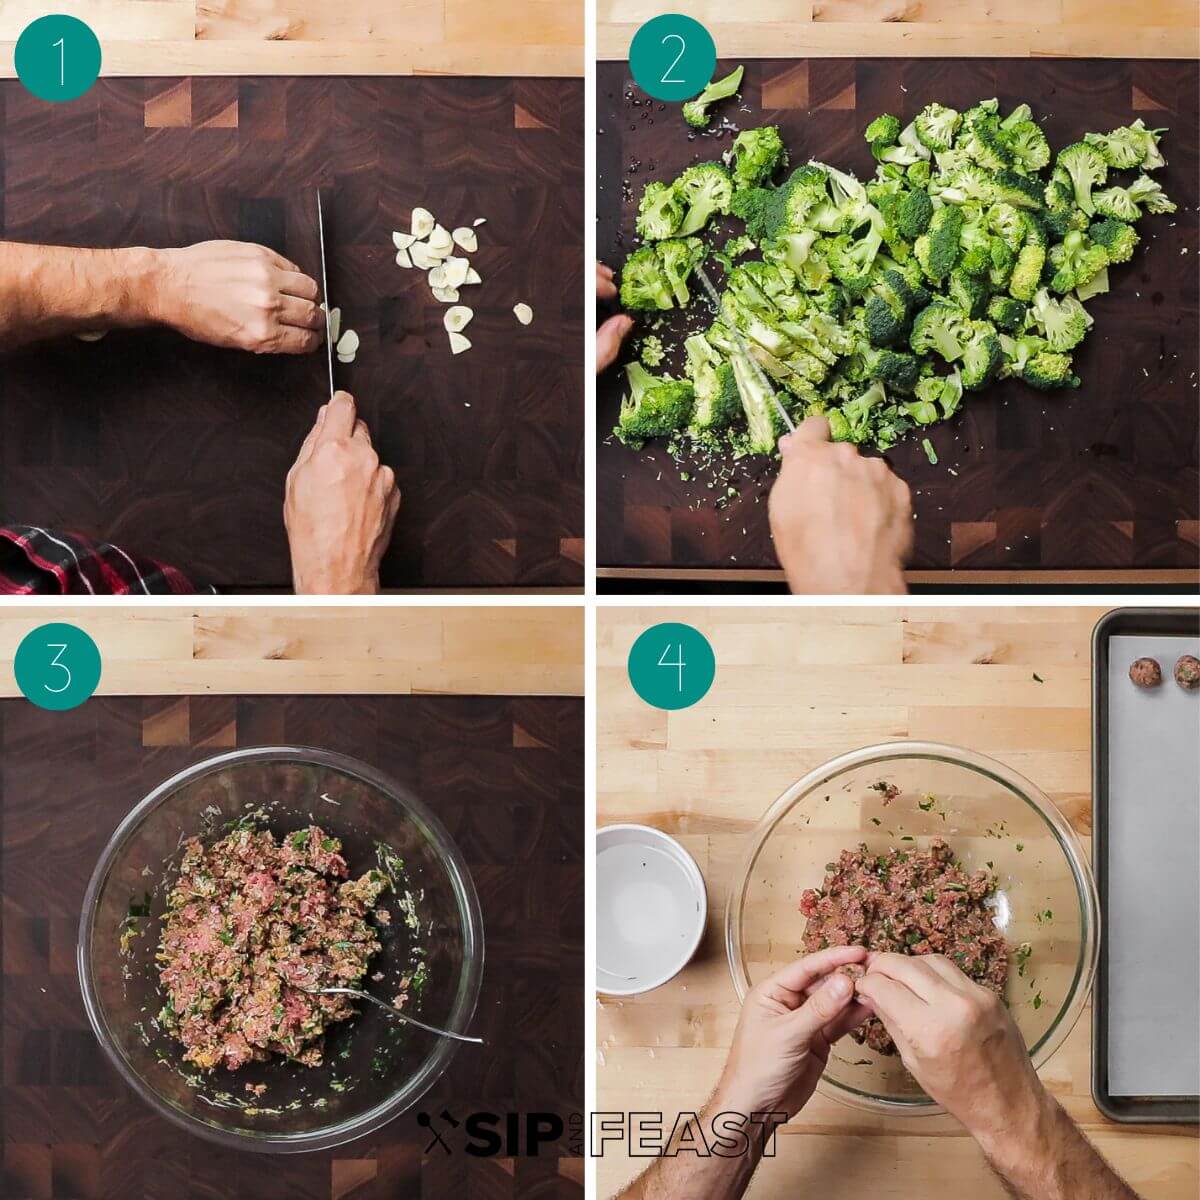 Pasta broccoli with tiny meatballs recipe process shot collage group number one showing chopped garlic, broccoli, meatball mixture and hands making meatballs.